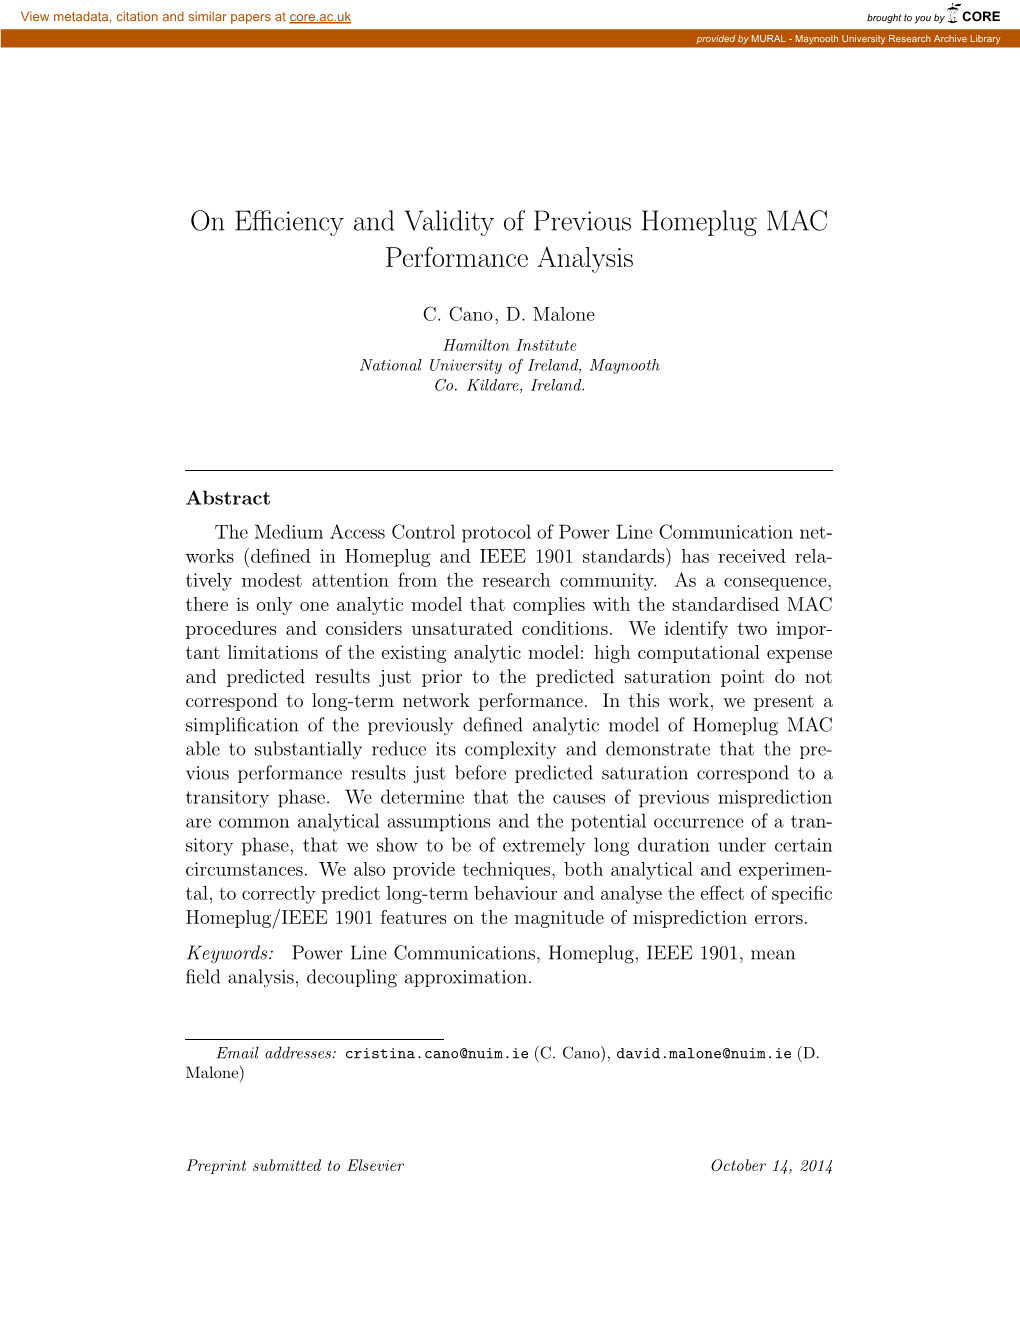 On Efficiency and Validity of Previous Homeplug MAC Performance Analysis